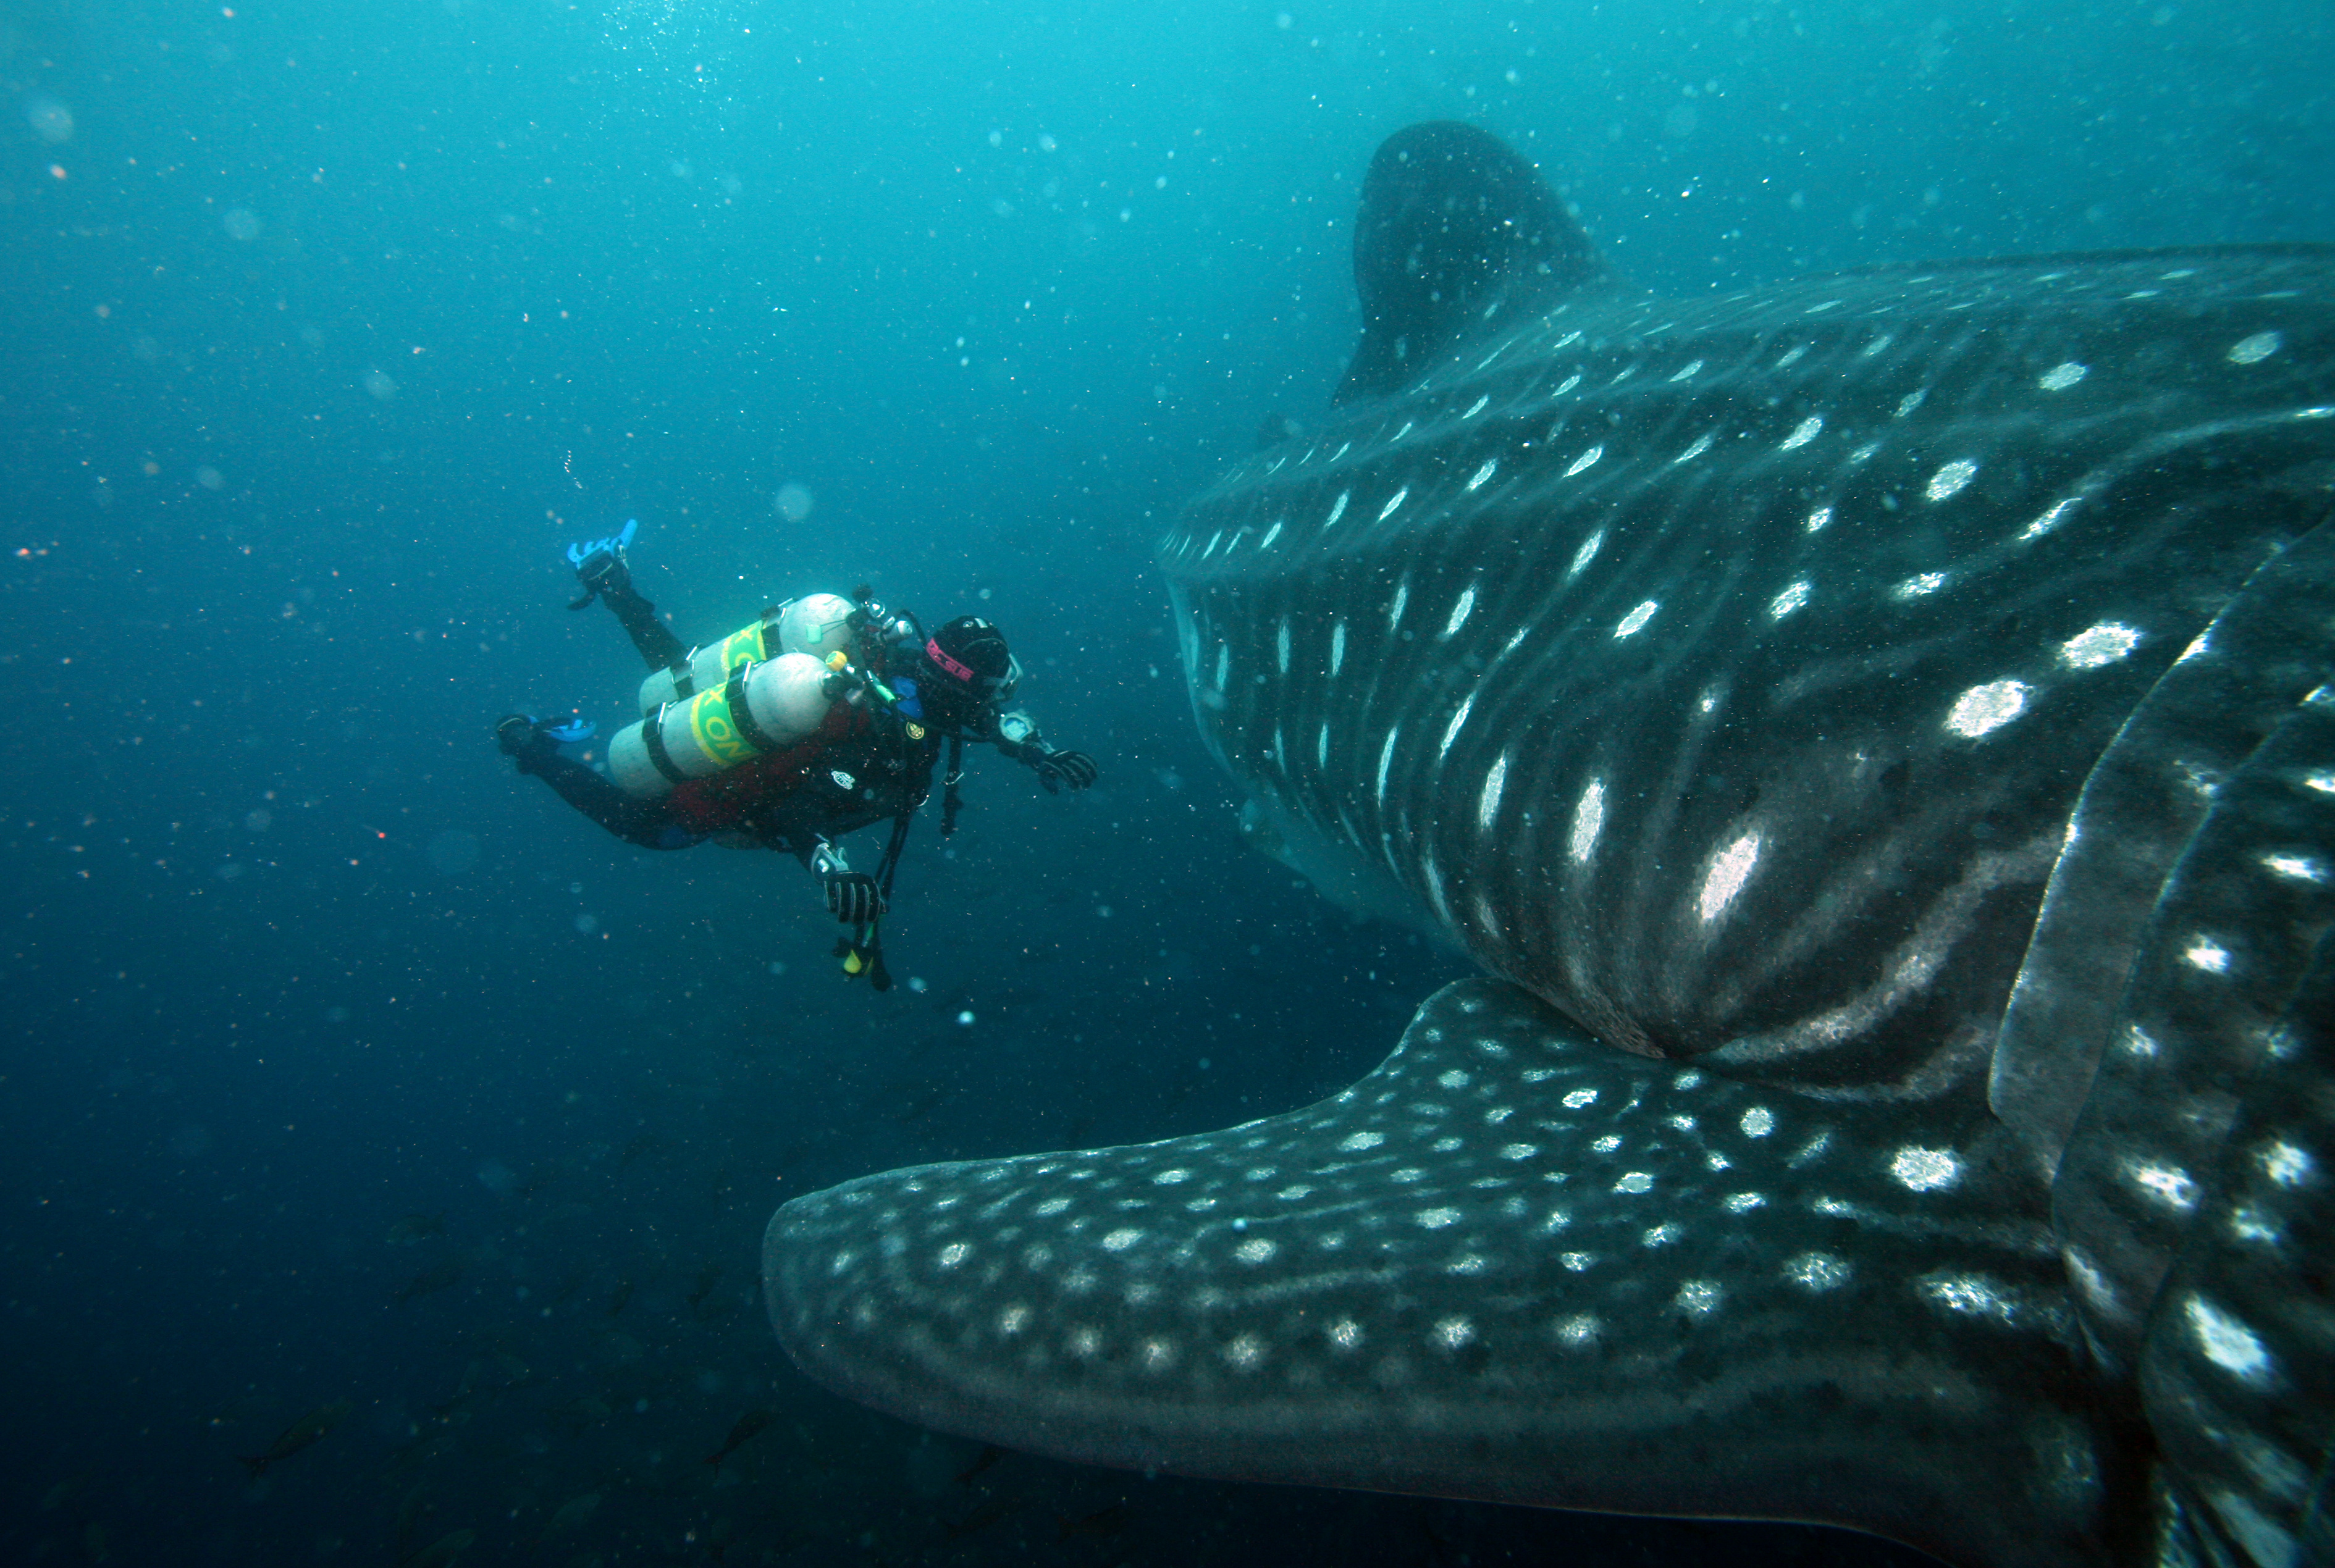 Advanced divers encounter whaleshark at the Djibouti Crack dive site in the waters of Djibouti, Africa